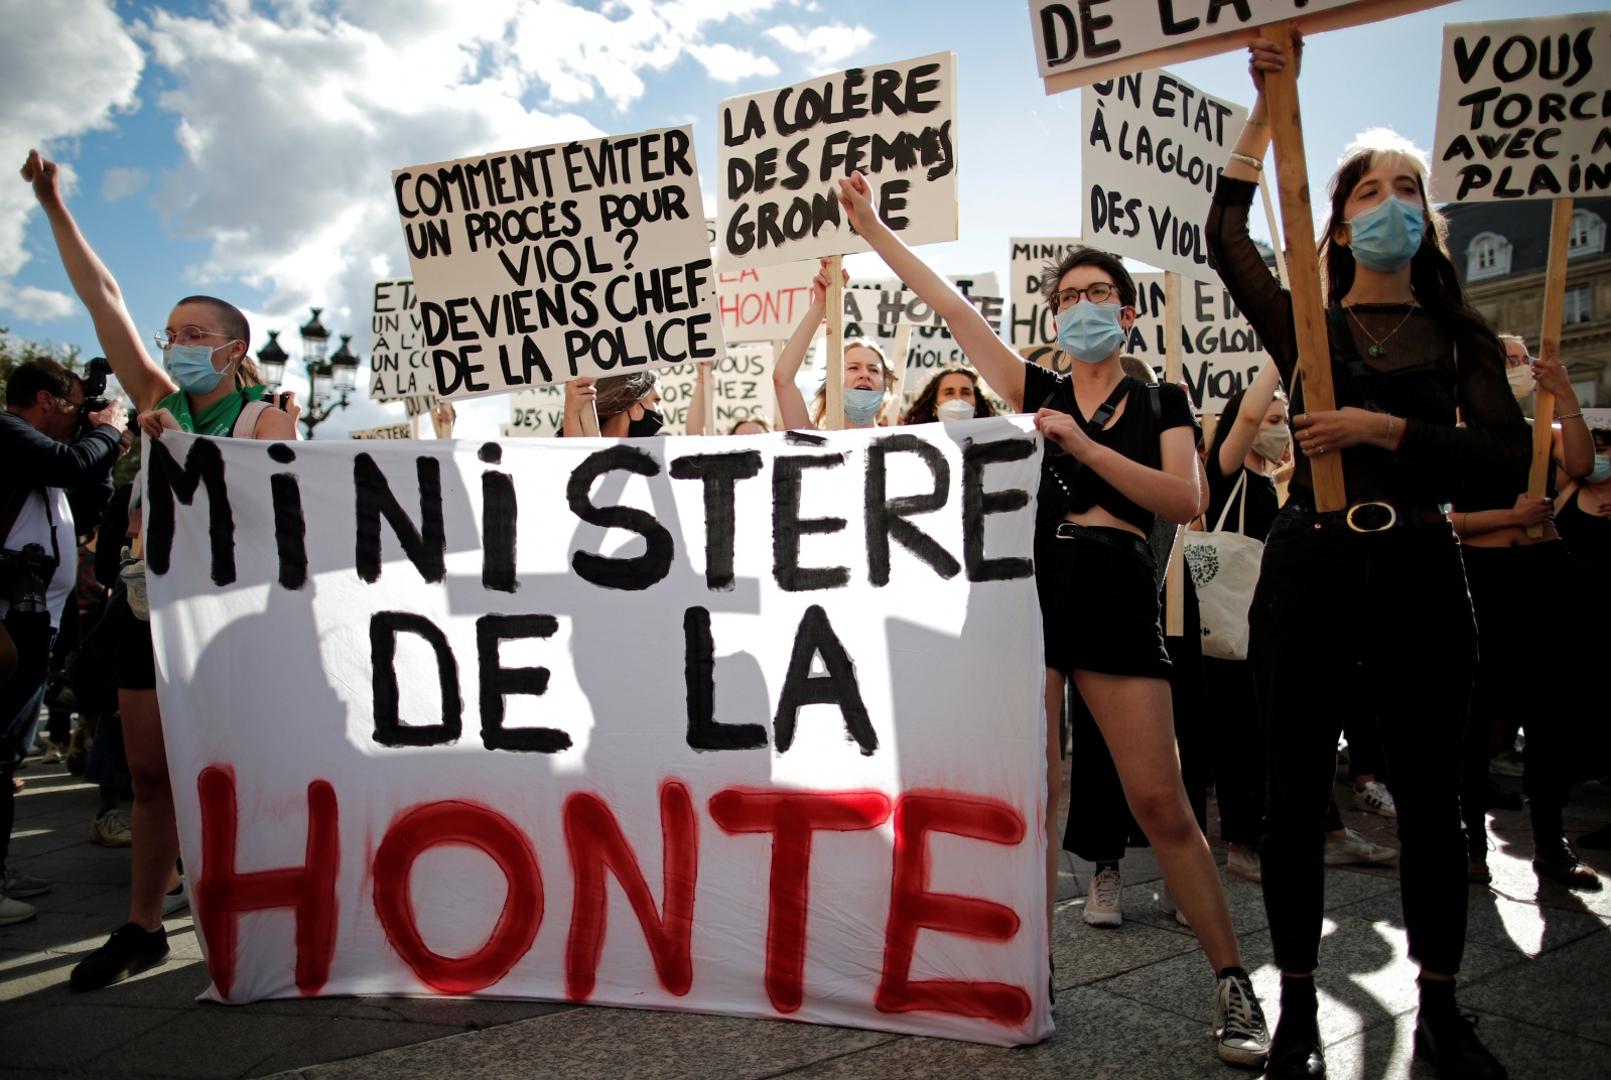 Feminist activists demonstrate against new government appointments in Paris Feminist activists hold a banner reading "Ministry of shame" during a demonstration against the appointments of French Interior Minister Gerald Darmanin and Justice Minister Eric Dupond-Moretti in the new French government, in front of the city hall in Paris, France, July 10, 2020. REUTERS/Benoit Tessier BENOIT TESSIER